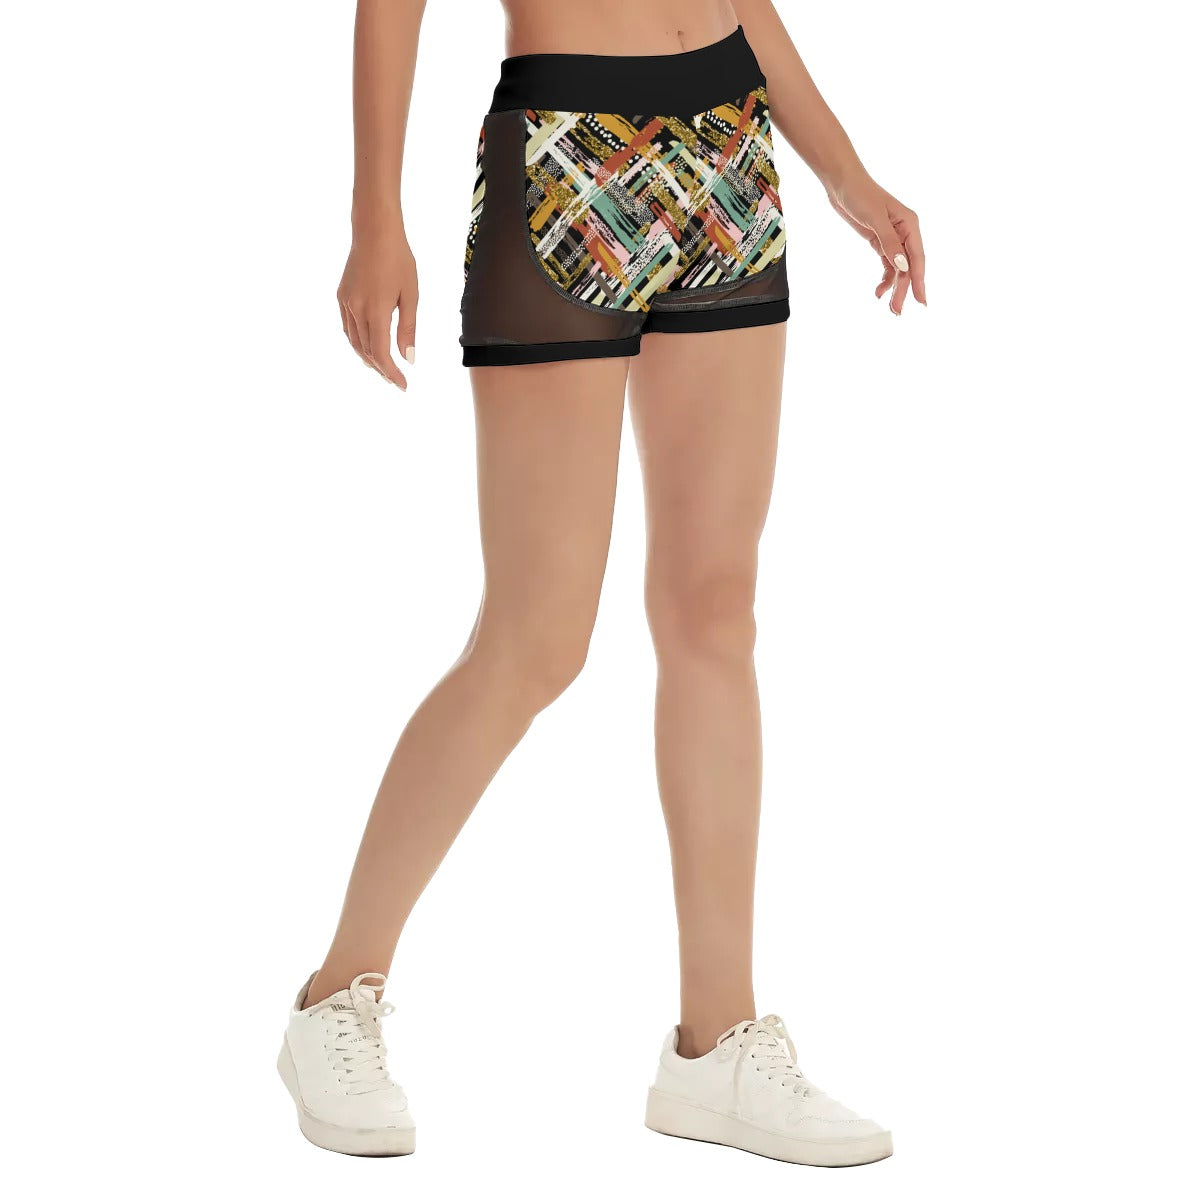 Colorful Yoga Shorts for Teen - Youth Energy Ladies Shorts - Personal Hour for Yoga and Meditations 